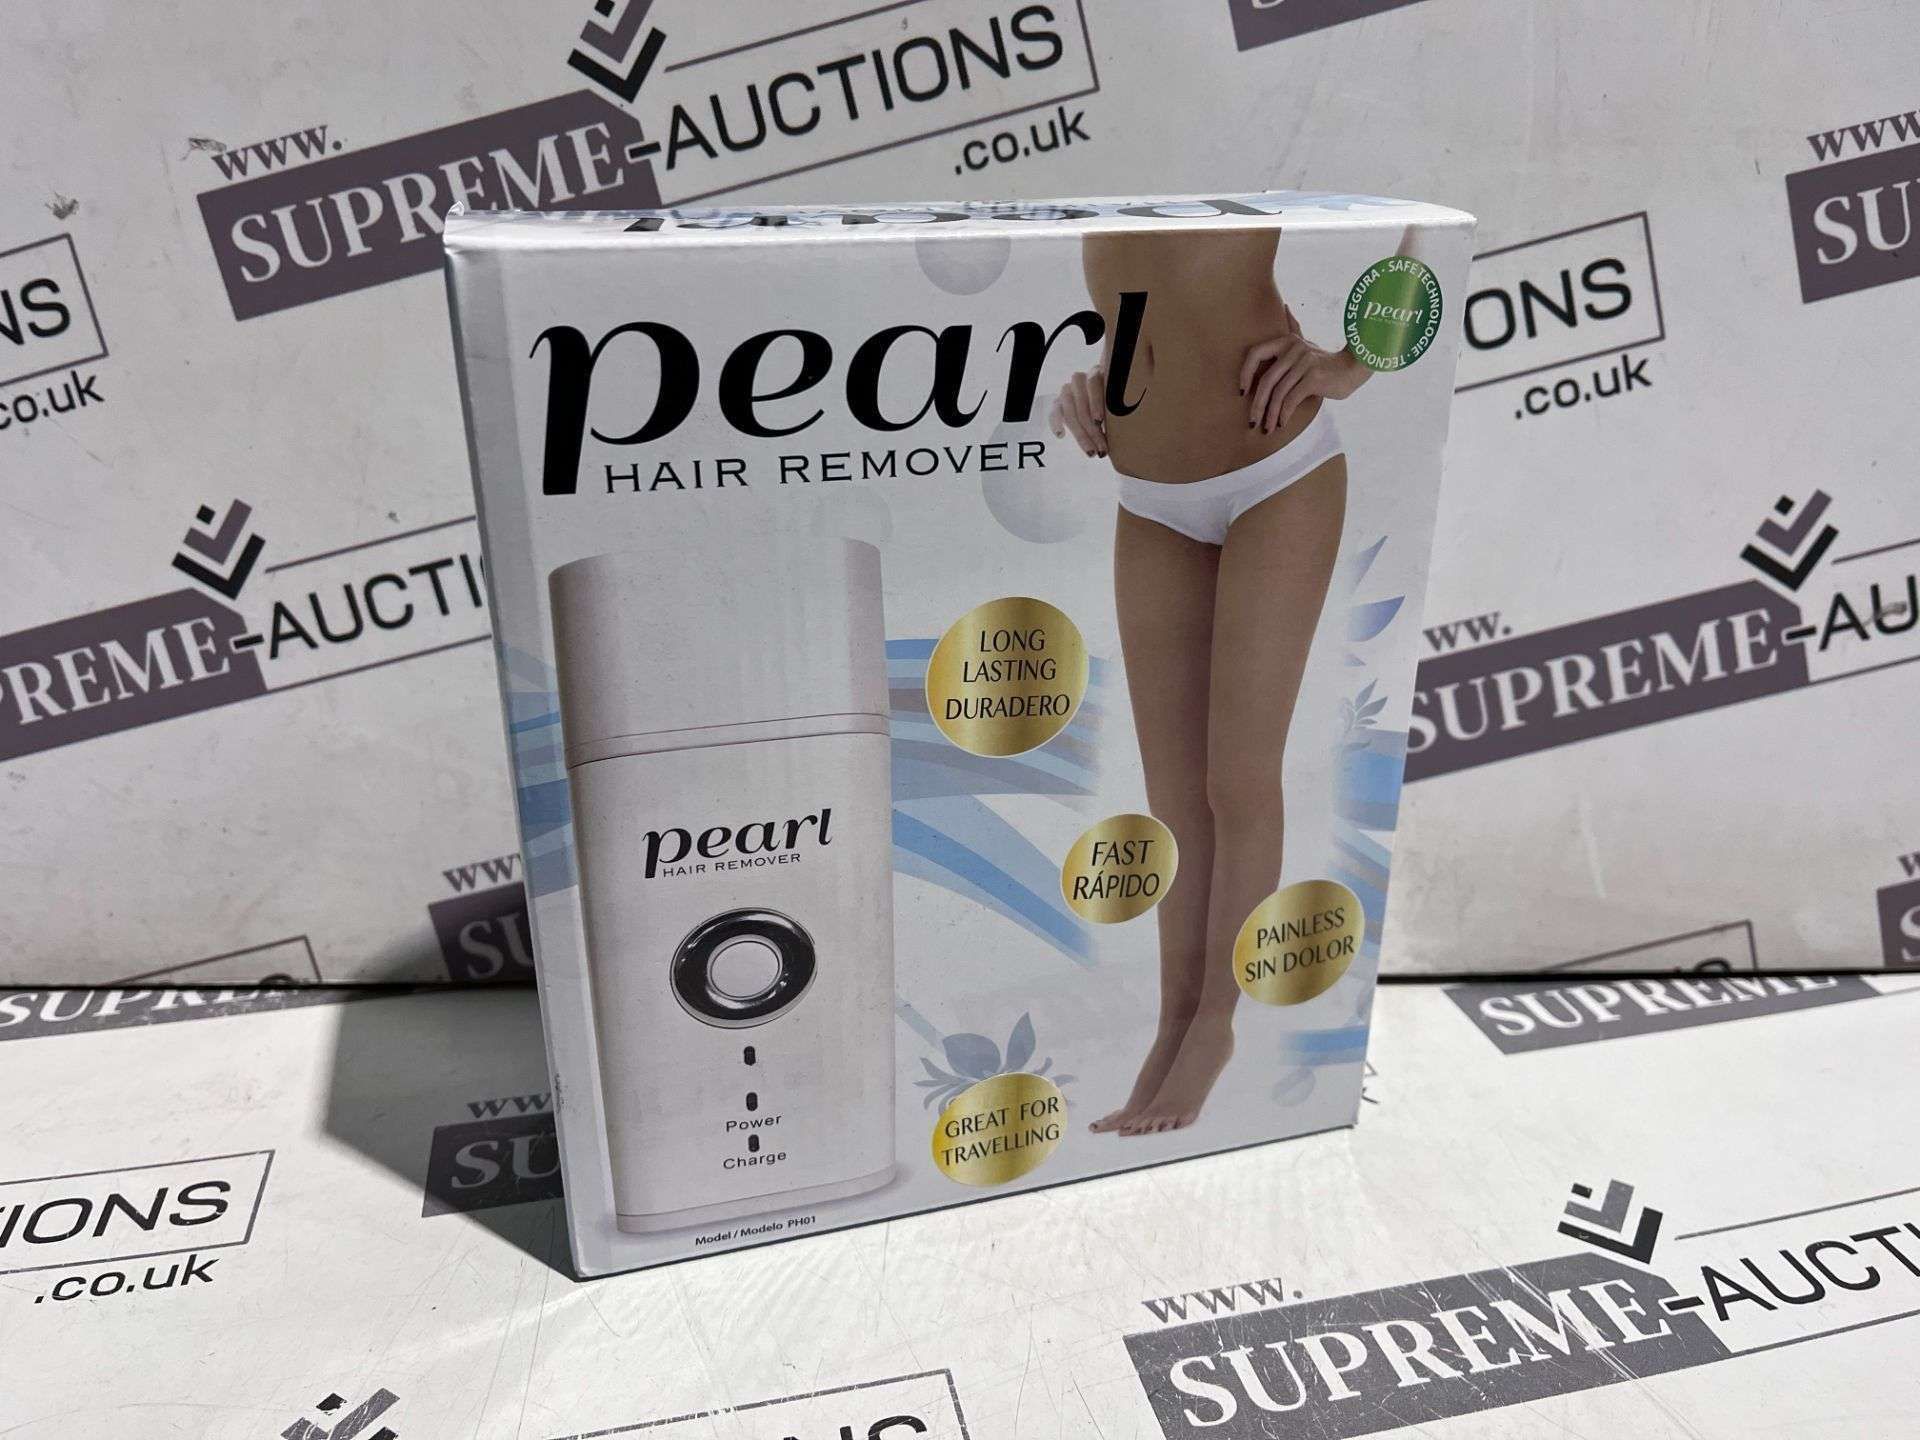 TRADE LOT 24 X BRAND NEW PEARL HAIR REMOVER SETS RRP £39 EACH R5